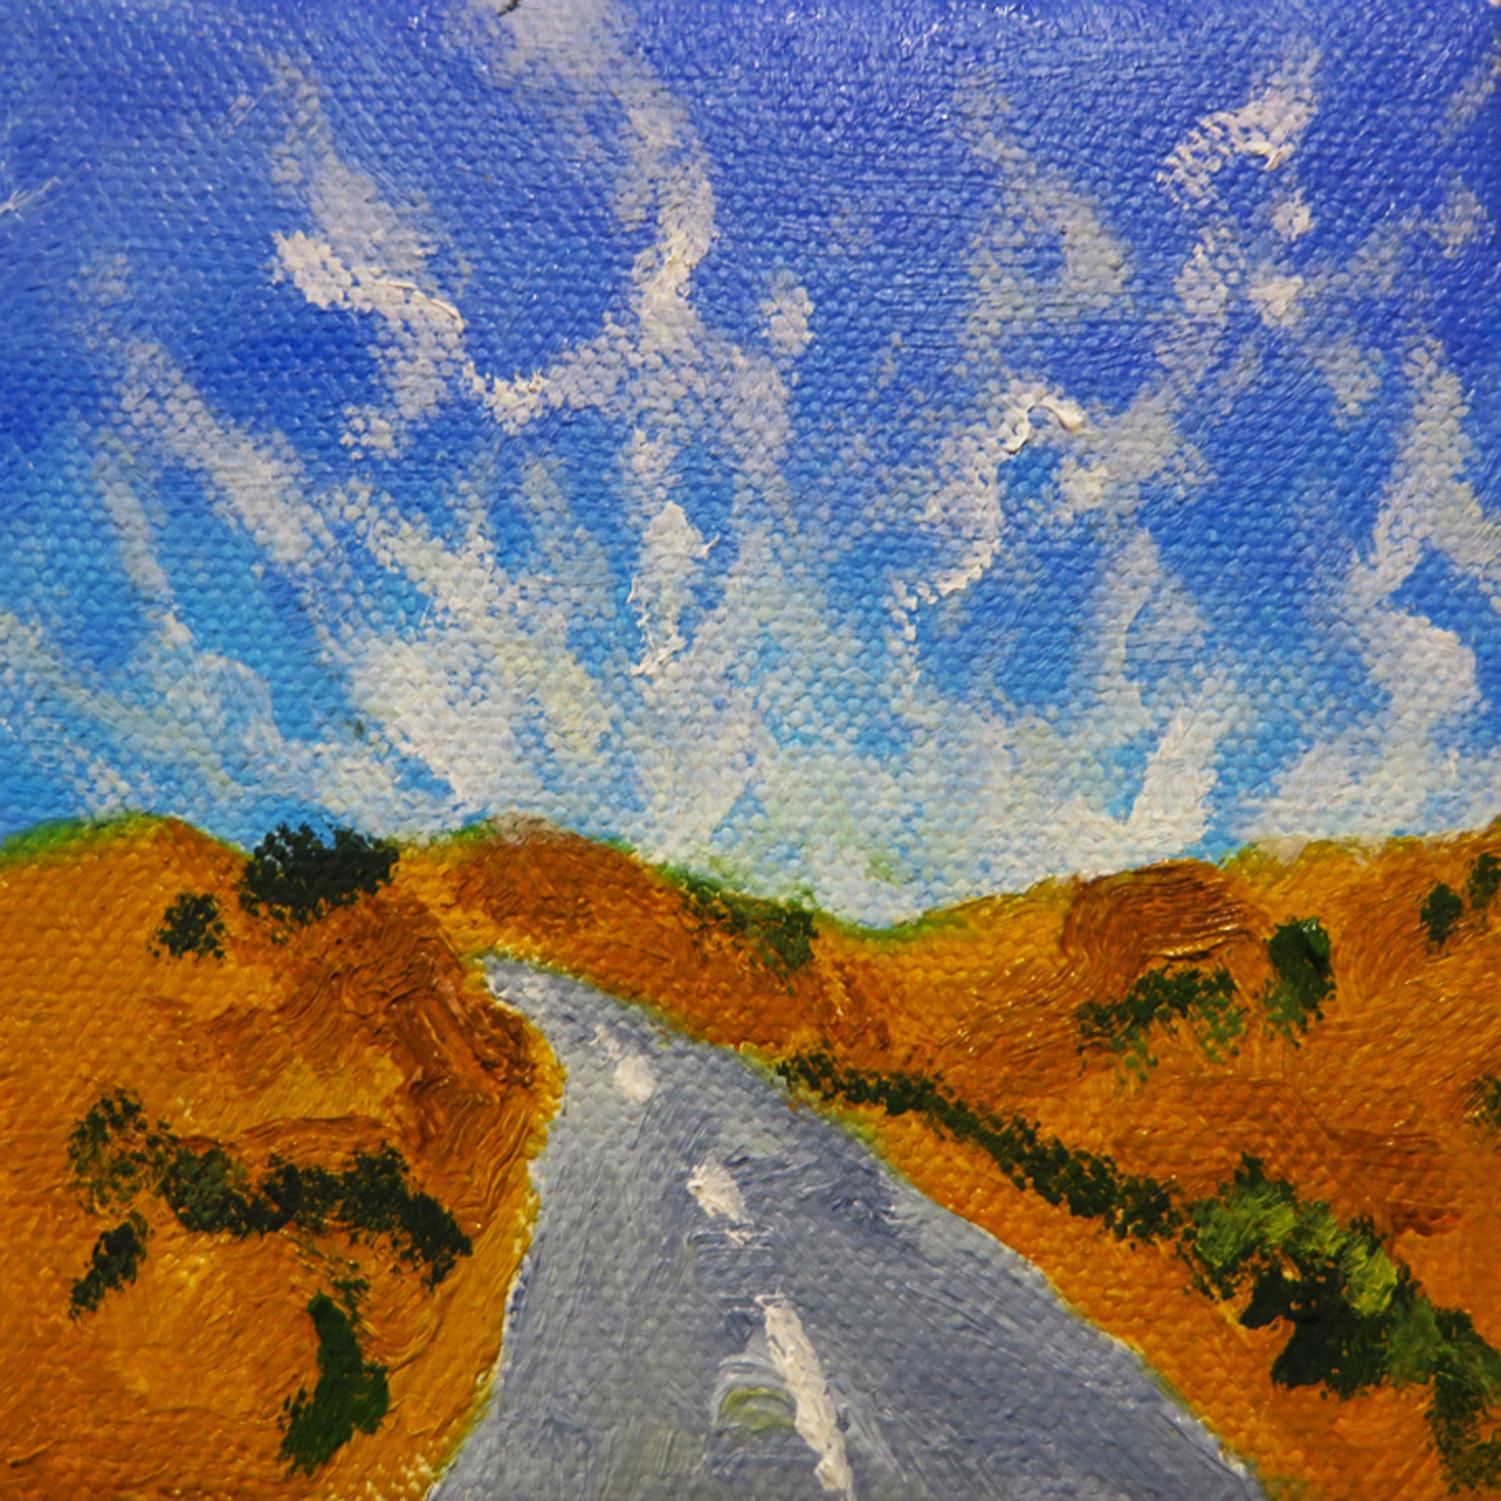 Mitchell Freifeld Landscape Painting - The Open Highway with Mare's Tail Clouds